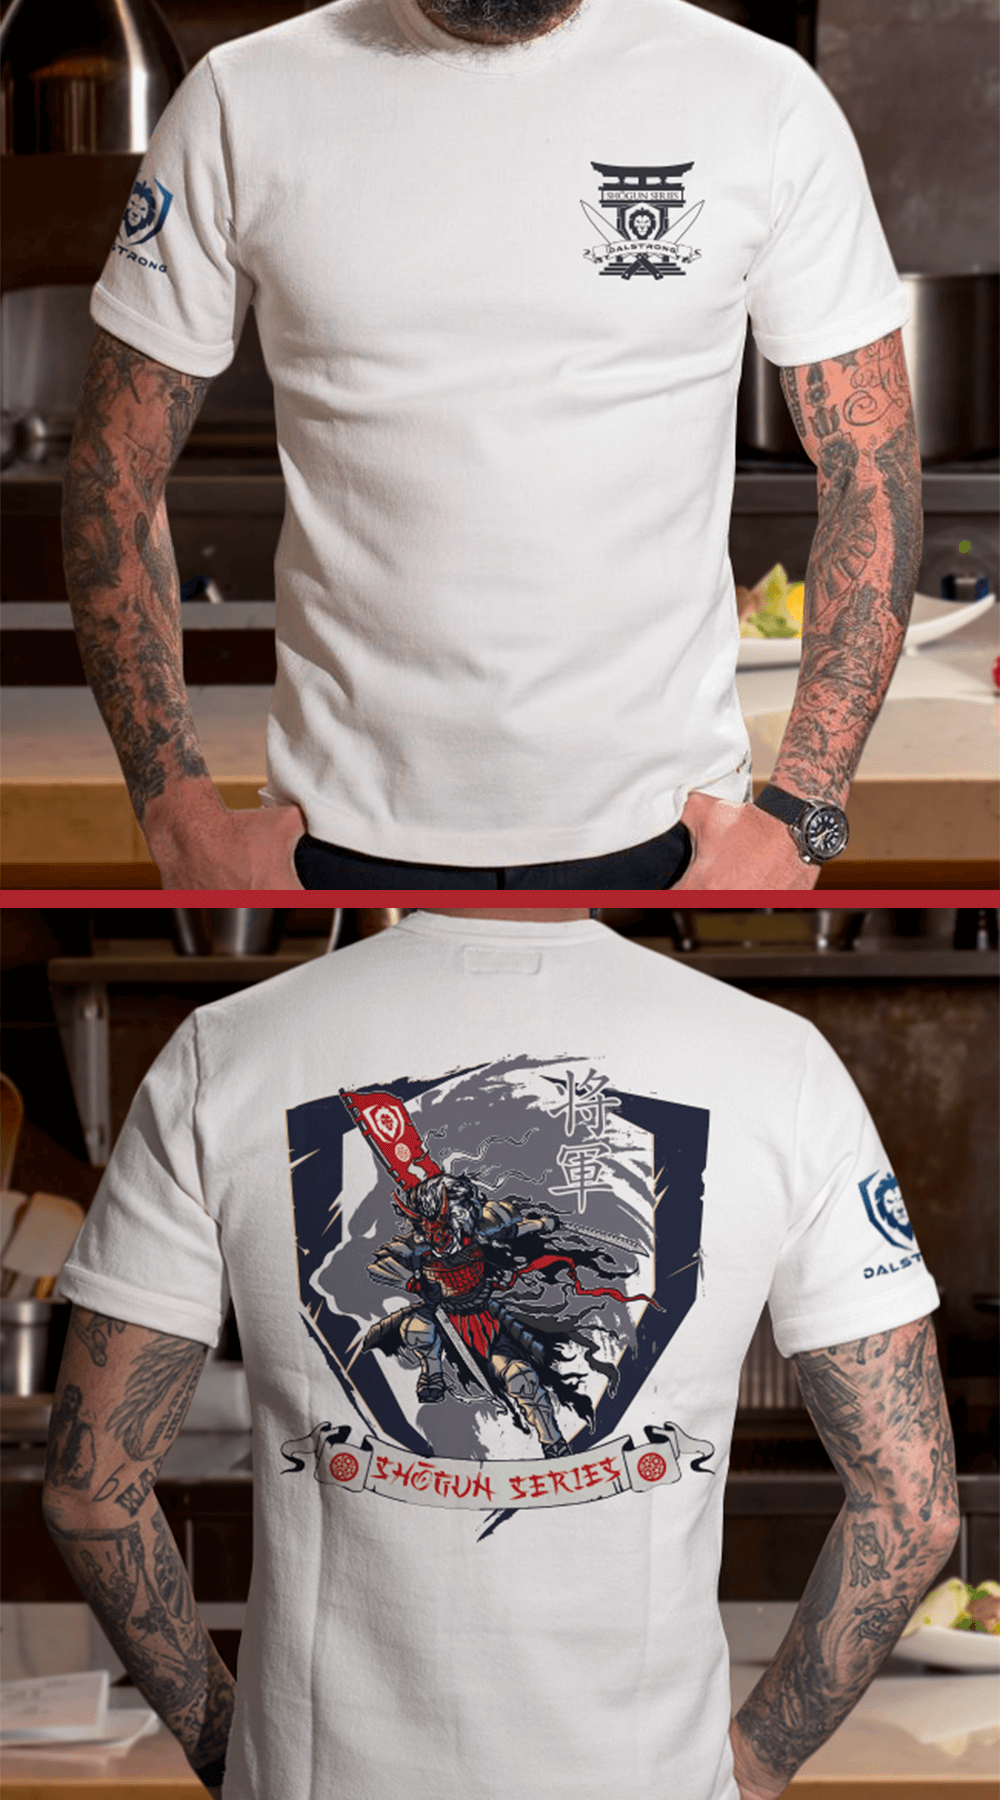 Dalstrong the shogun series war dance tee white front and back preview.